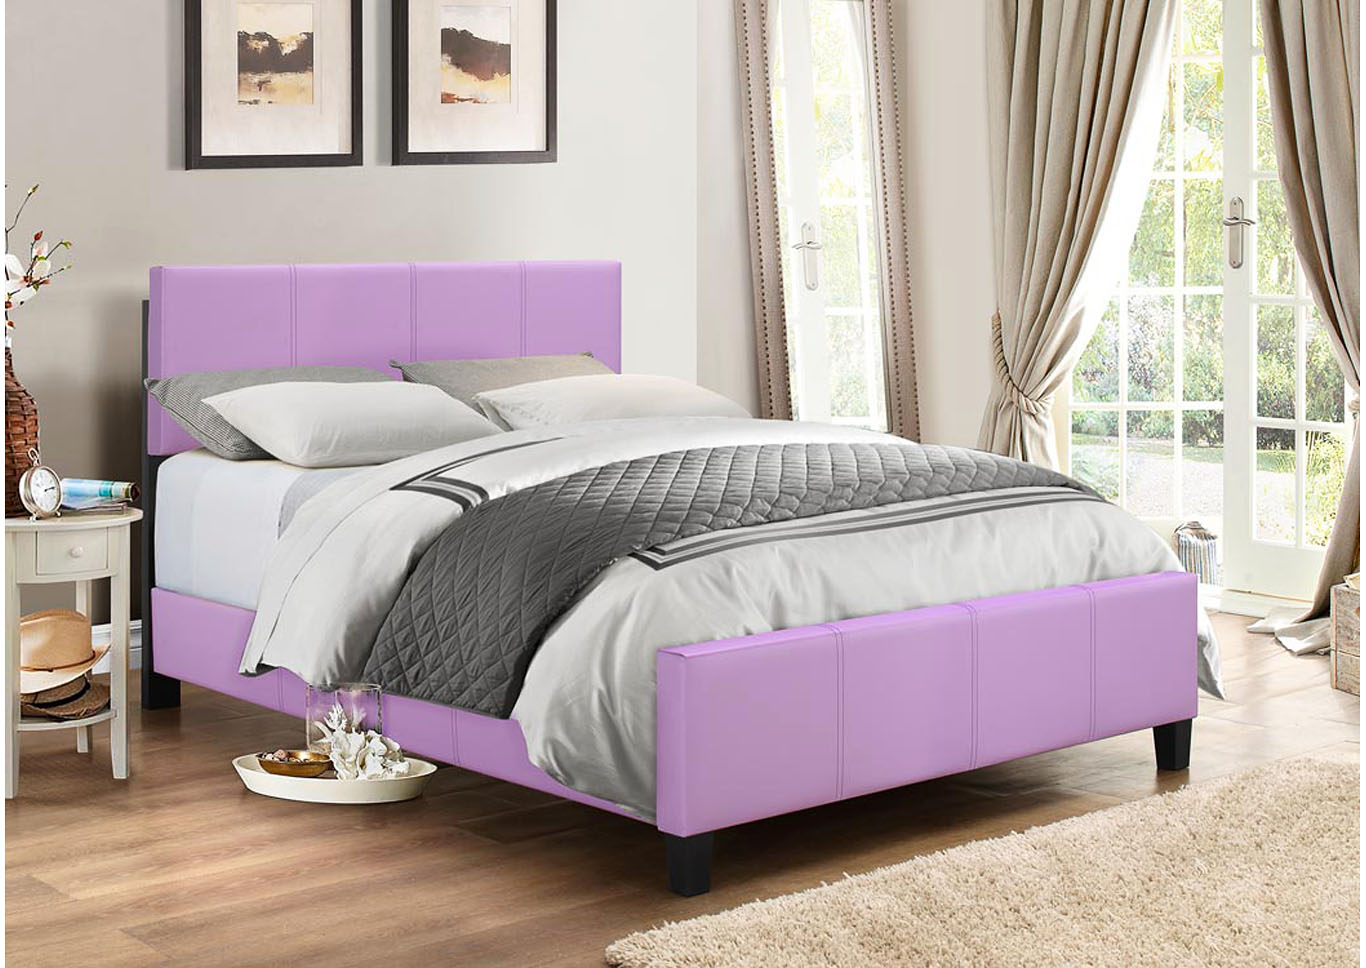 Zenfield Lilac Panel King Bed,Global Trading